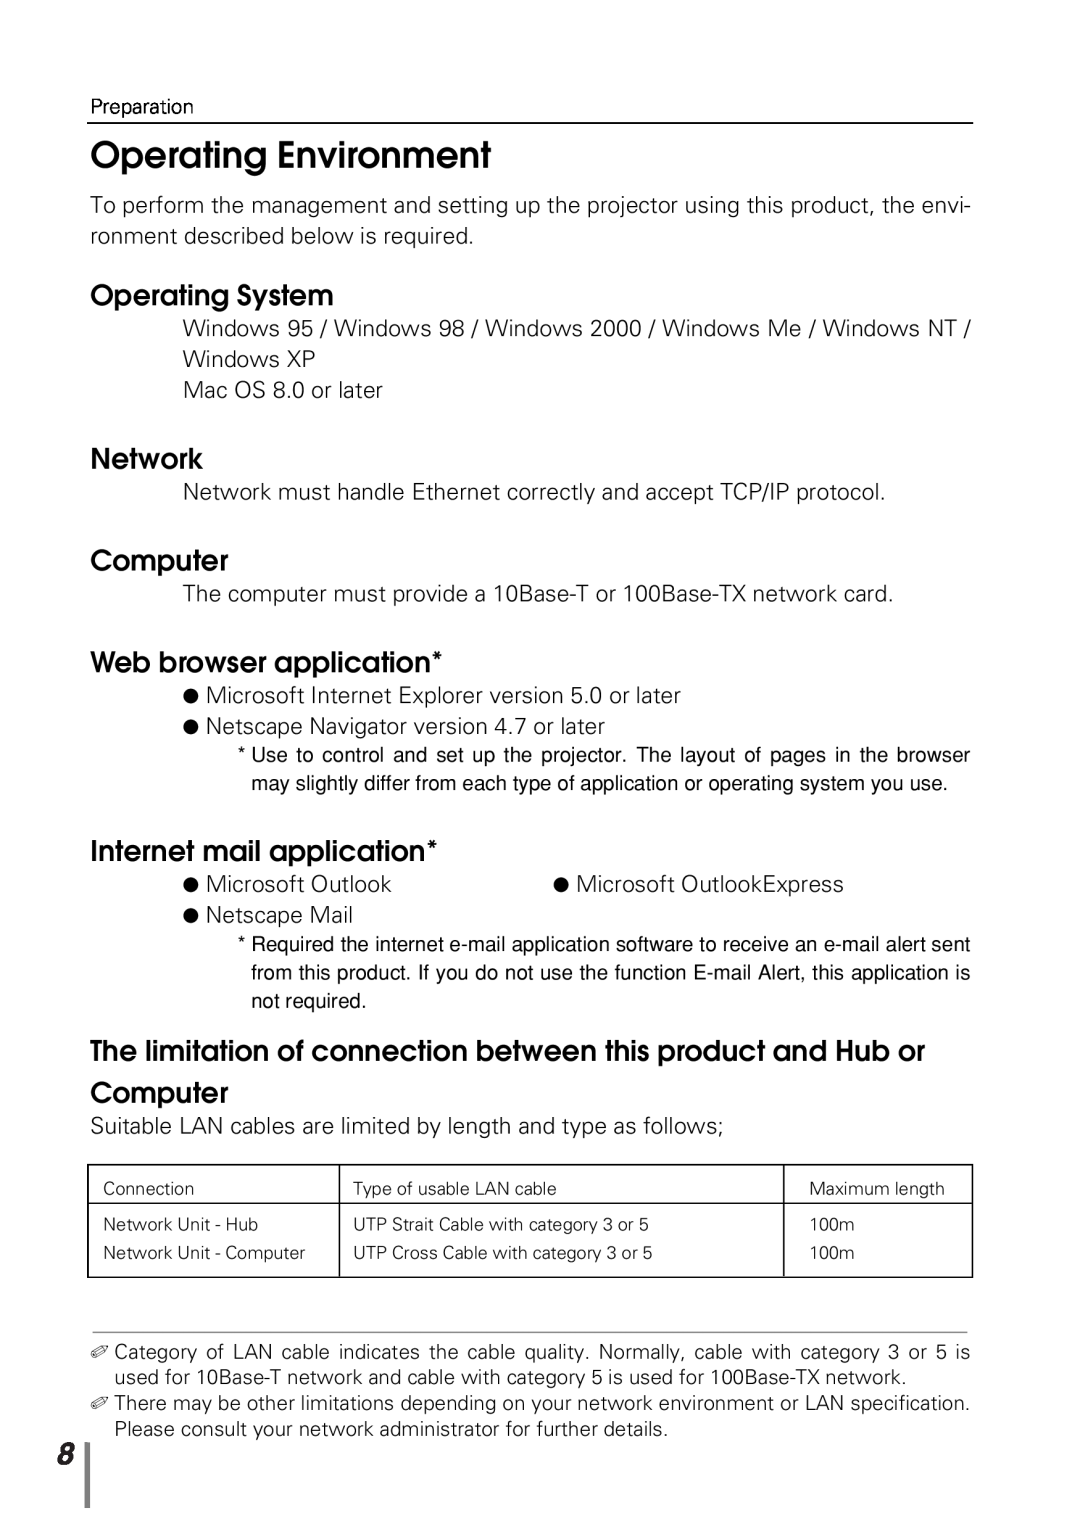 Sanyo POA-PN10 owner manual Operating Environment, Operating System, Network, Computer, Web browser application 